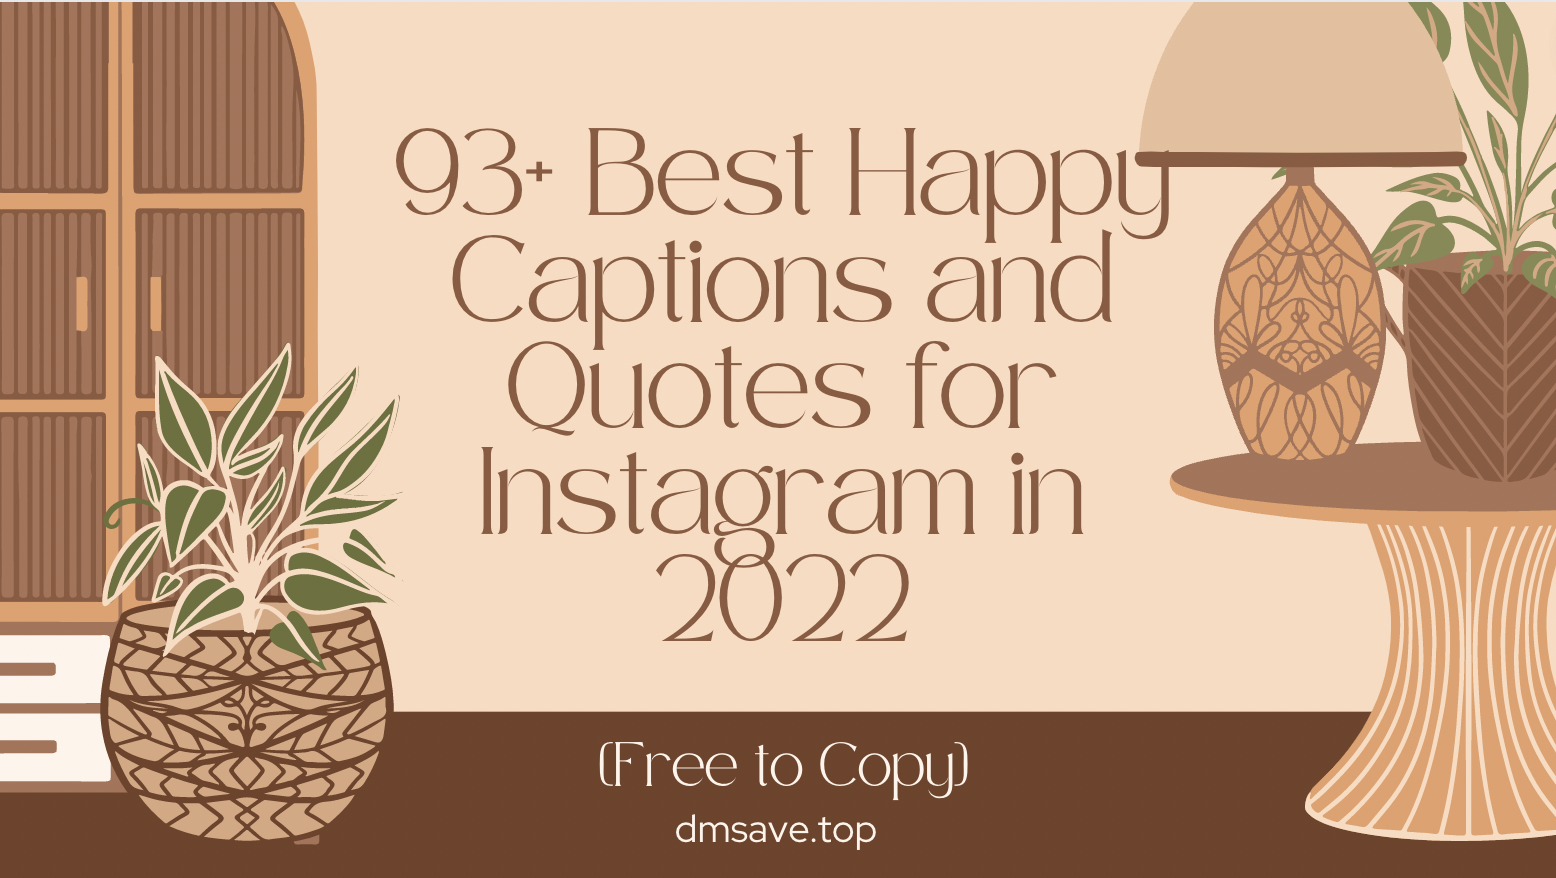 93+ Best Happy Captions and Quotes for Instagram in 2022 [Free to Copy]